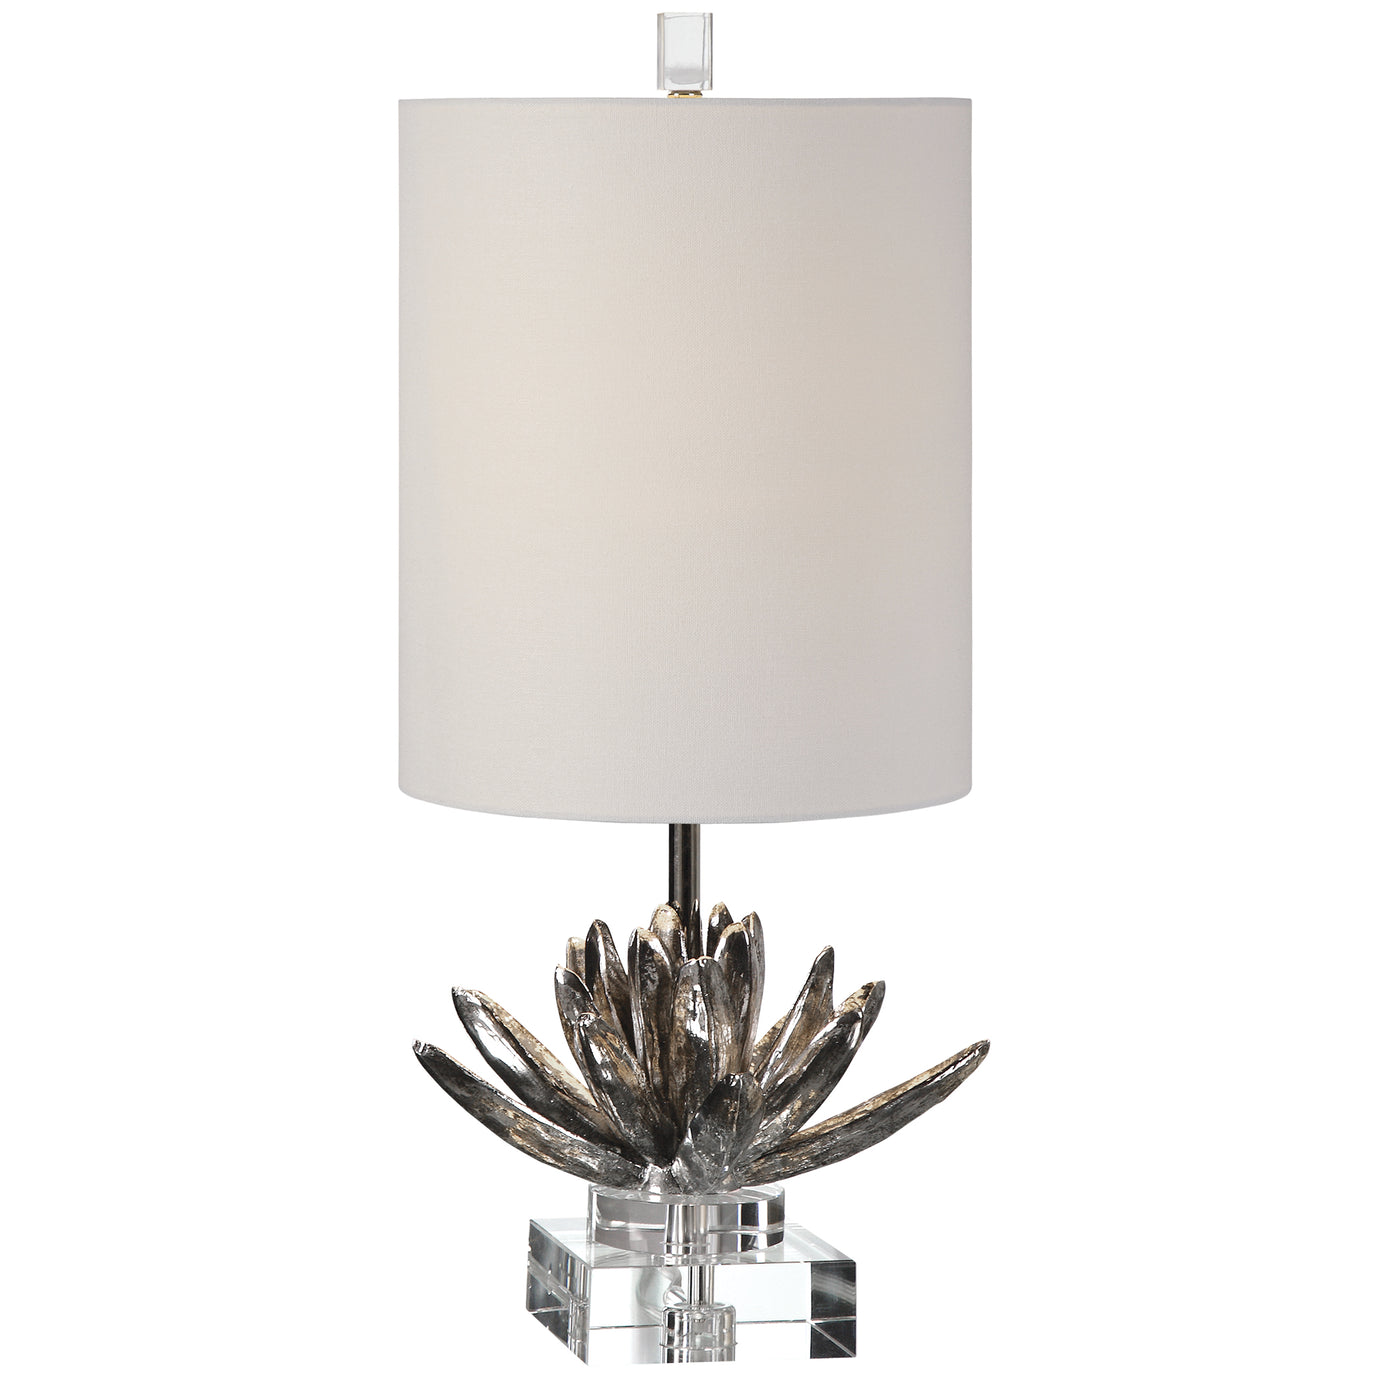 Simple Elegance Is Achieved By This Antiqued, Metallic Silver, Lotus Bloom That Appears To Be Floating On A Clear Crystal ...